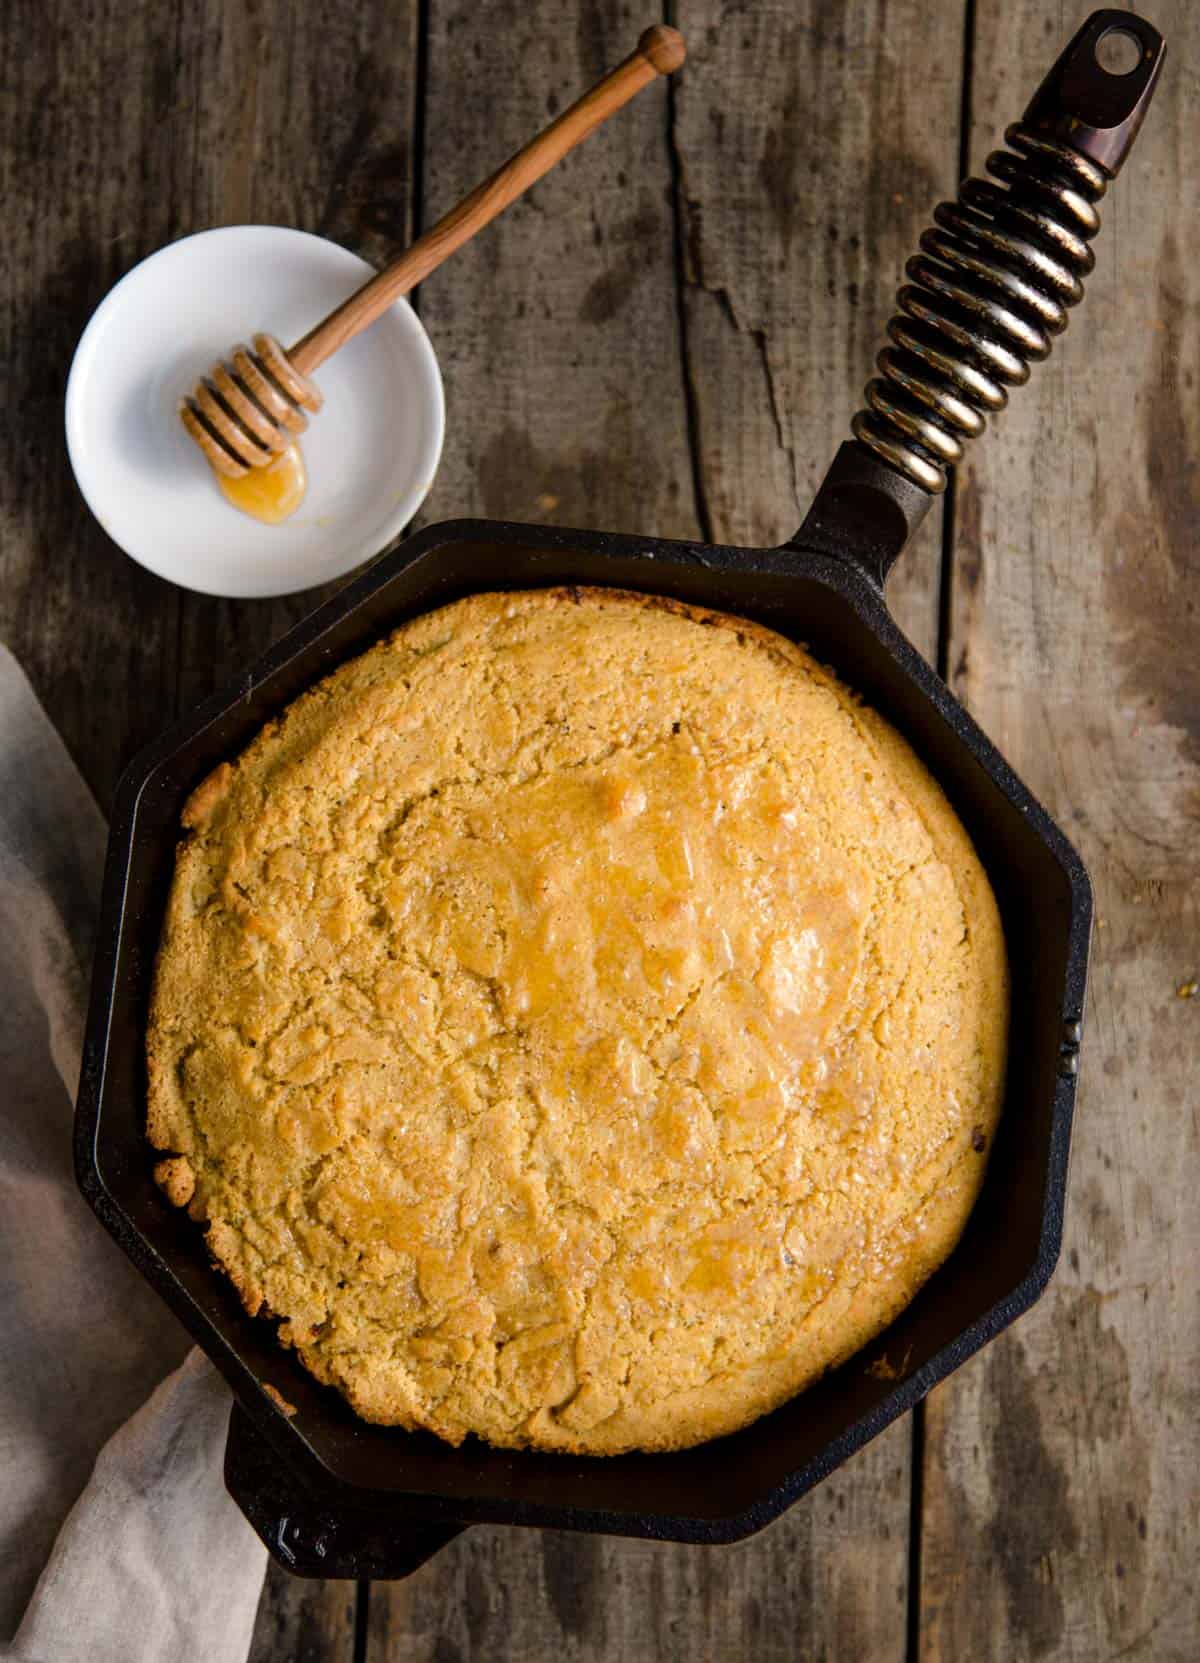 https://www.vindulge.com/wp-content/uploads/2020/04/Skillet-Cornbread-with-Smoked-Honey-cooked-on-the-grill.jpg